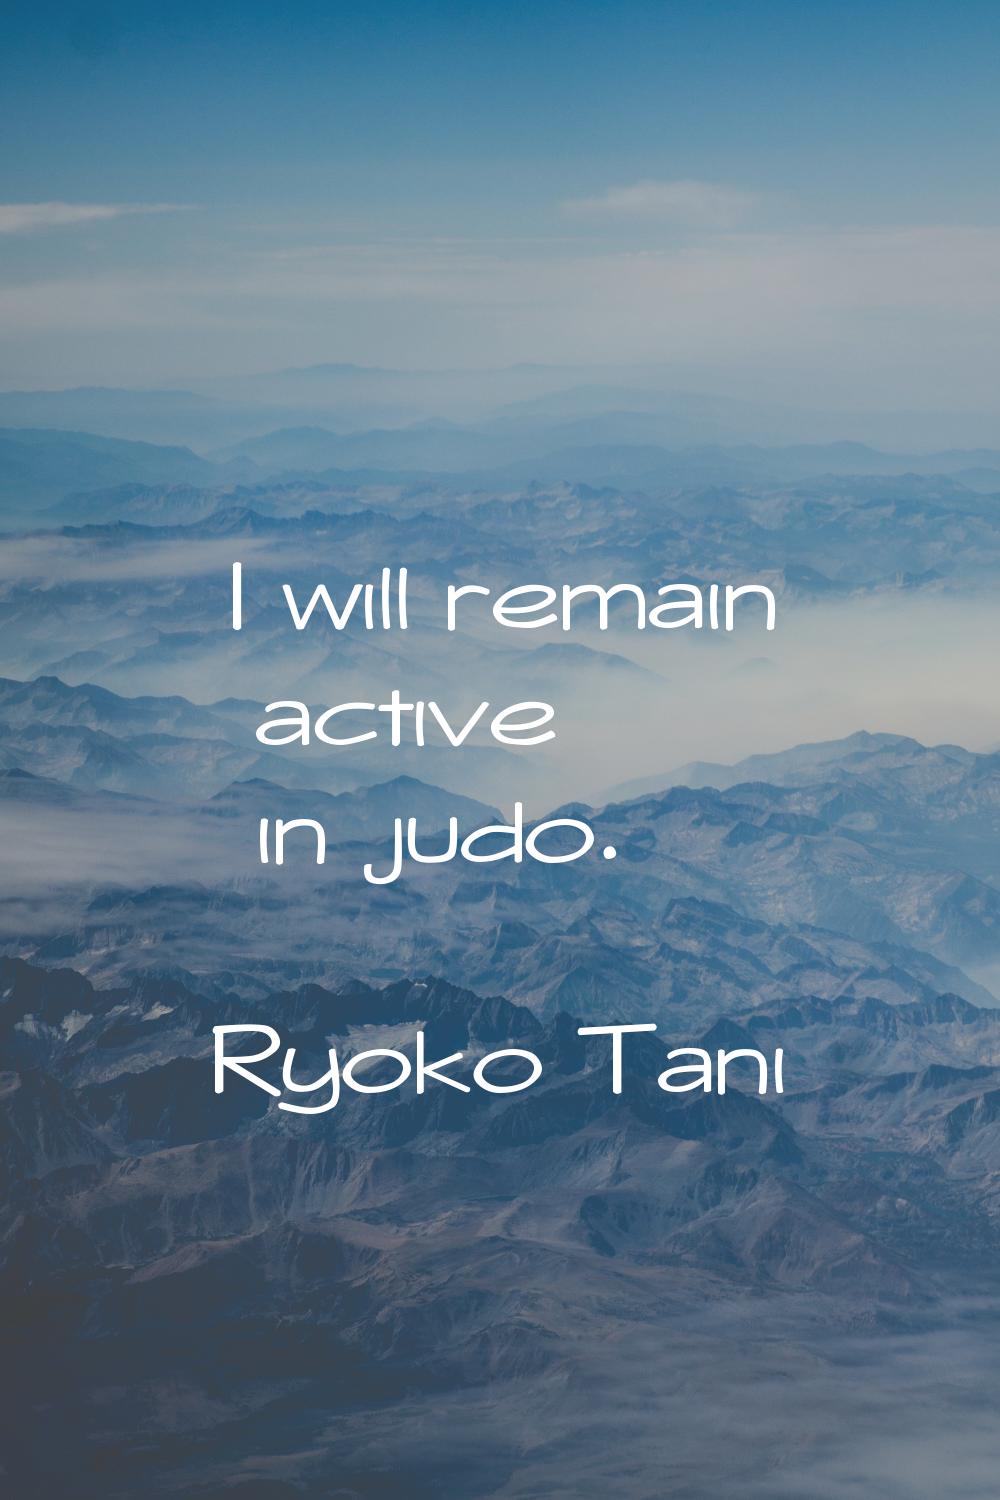 I will remain active in judo.